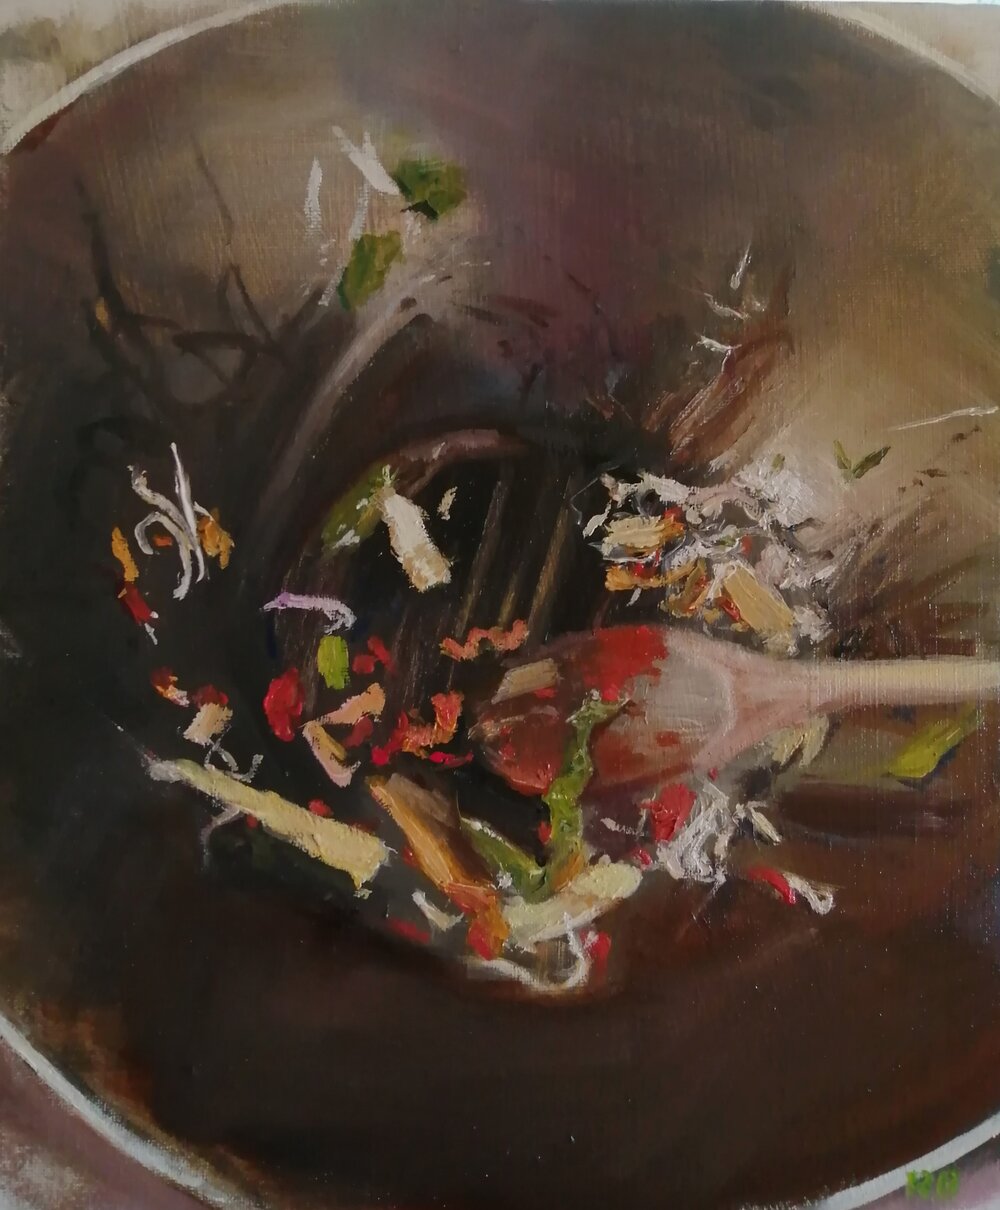  Stir fry  Oil on board  31x26 cm  not currently available   